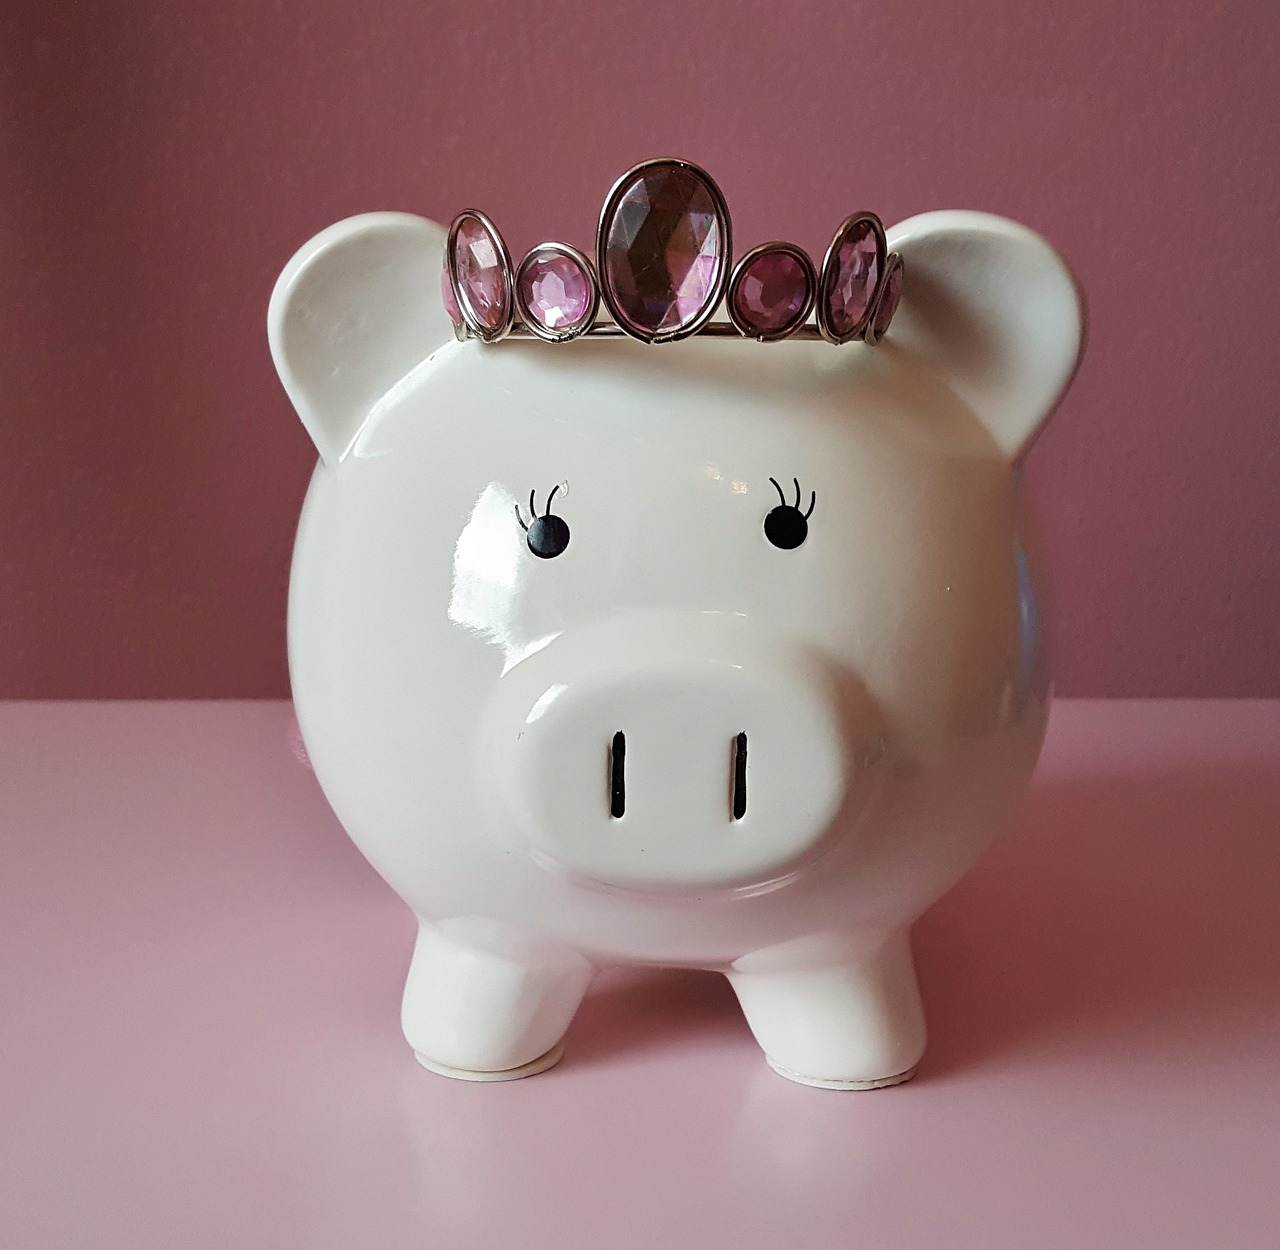 Prepping for the Festive Season: Early Bird Budgeting Tips